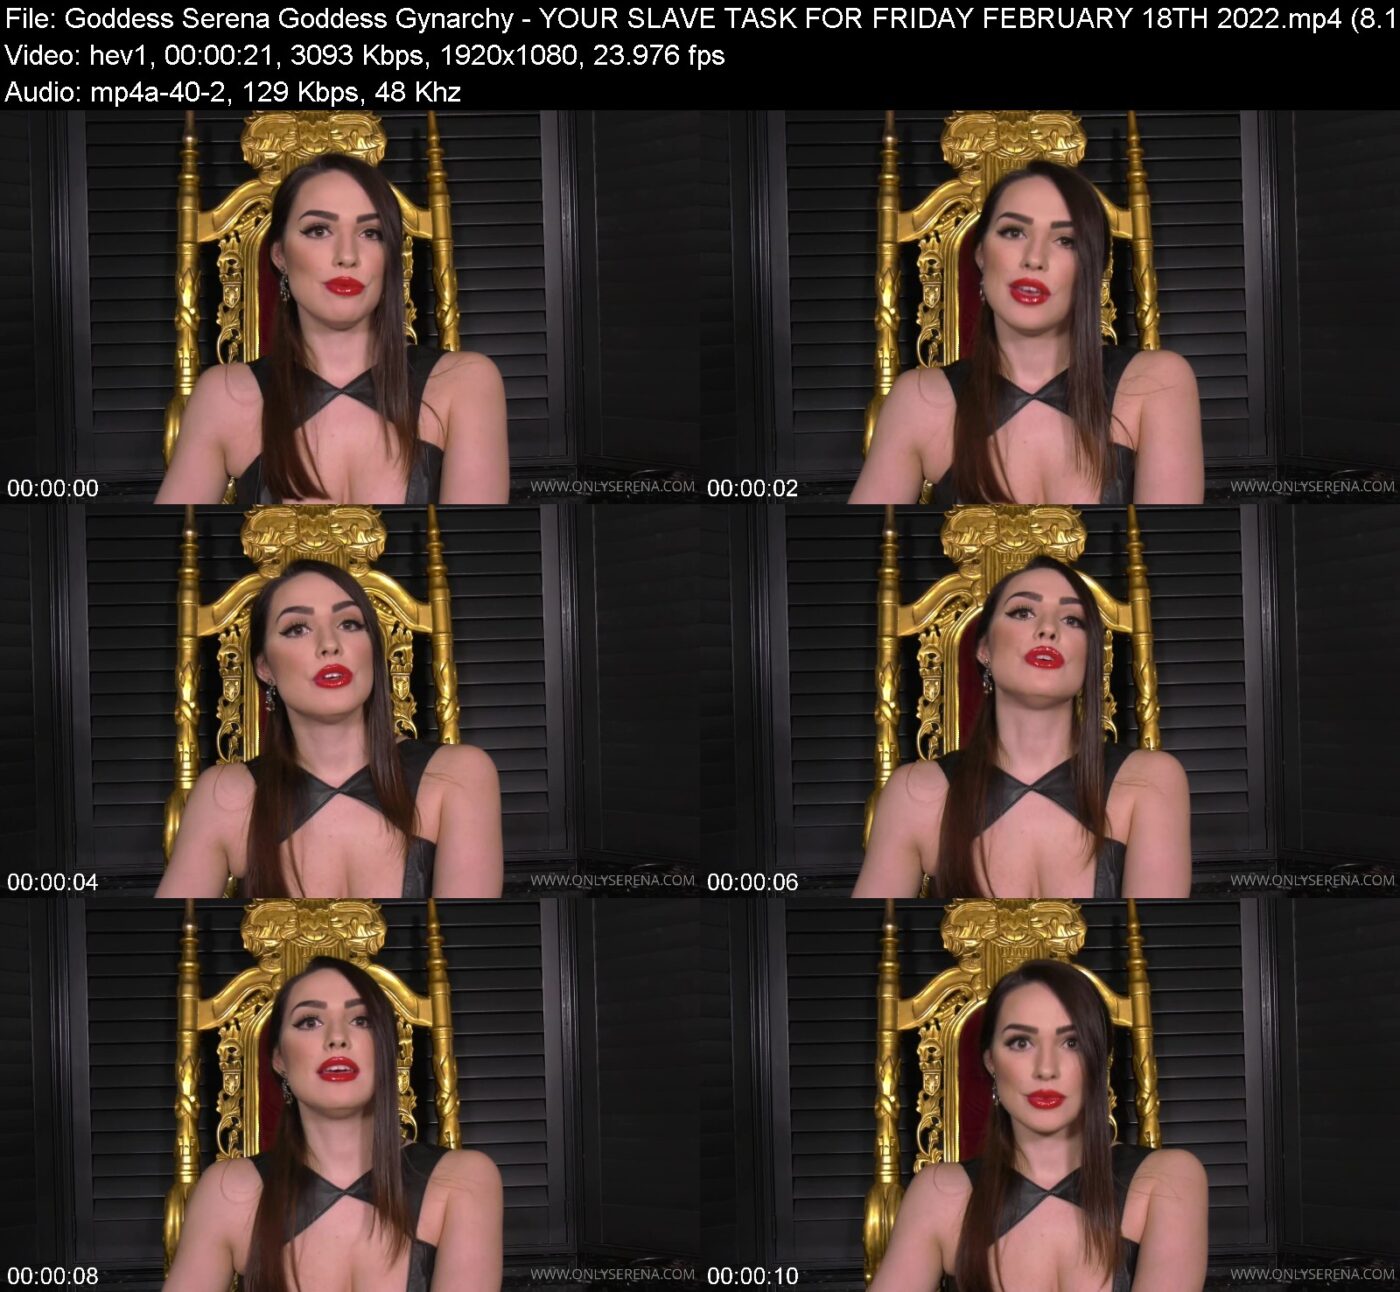 Actress: Goddess Serena Goddess Gynarchy. Title and Studio: YOUR SLAVE TASK FOR FRIDAY FEBRUARY 18TH 2022